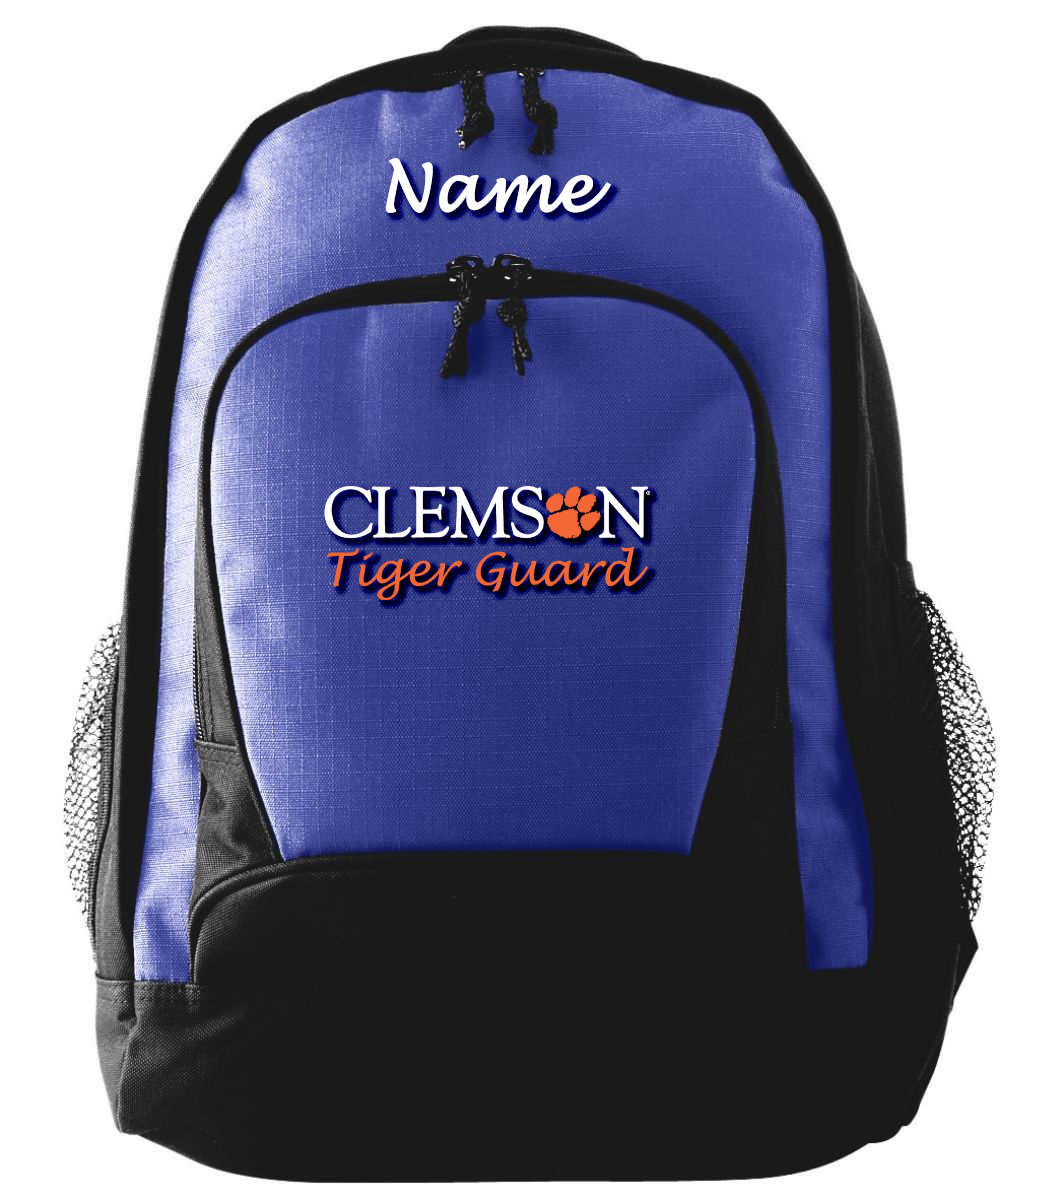 Clemson Tiger Guard Ripstop Backpack w/ Name & Logo Embroidery